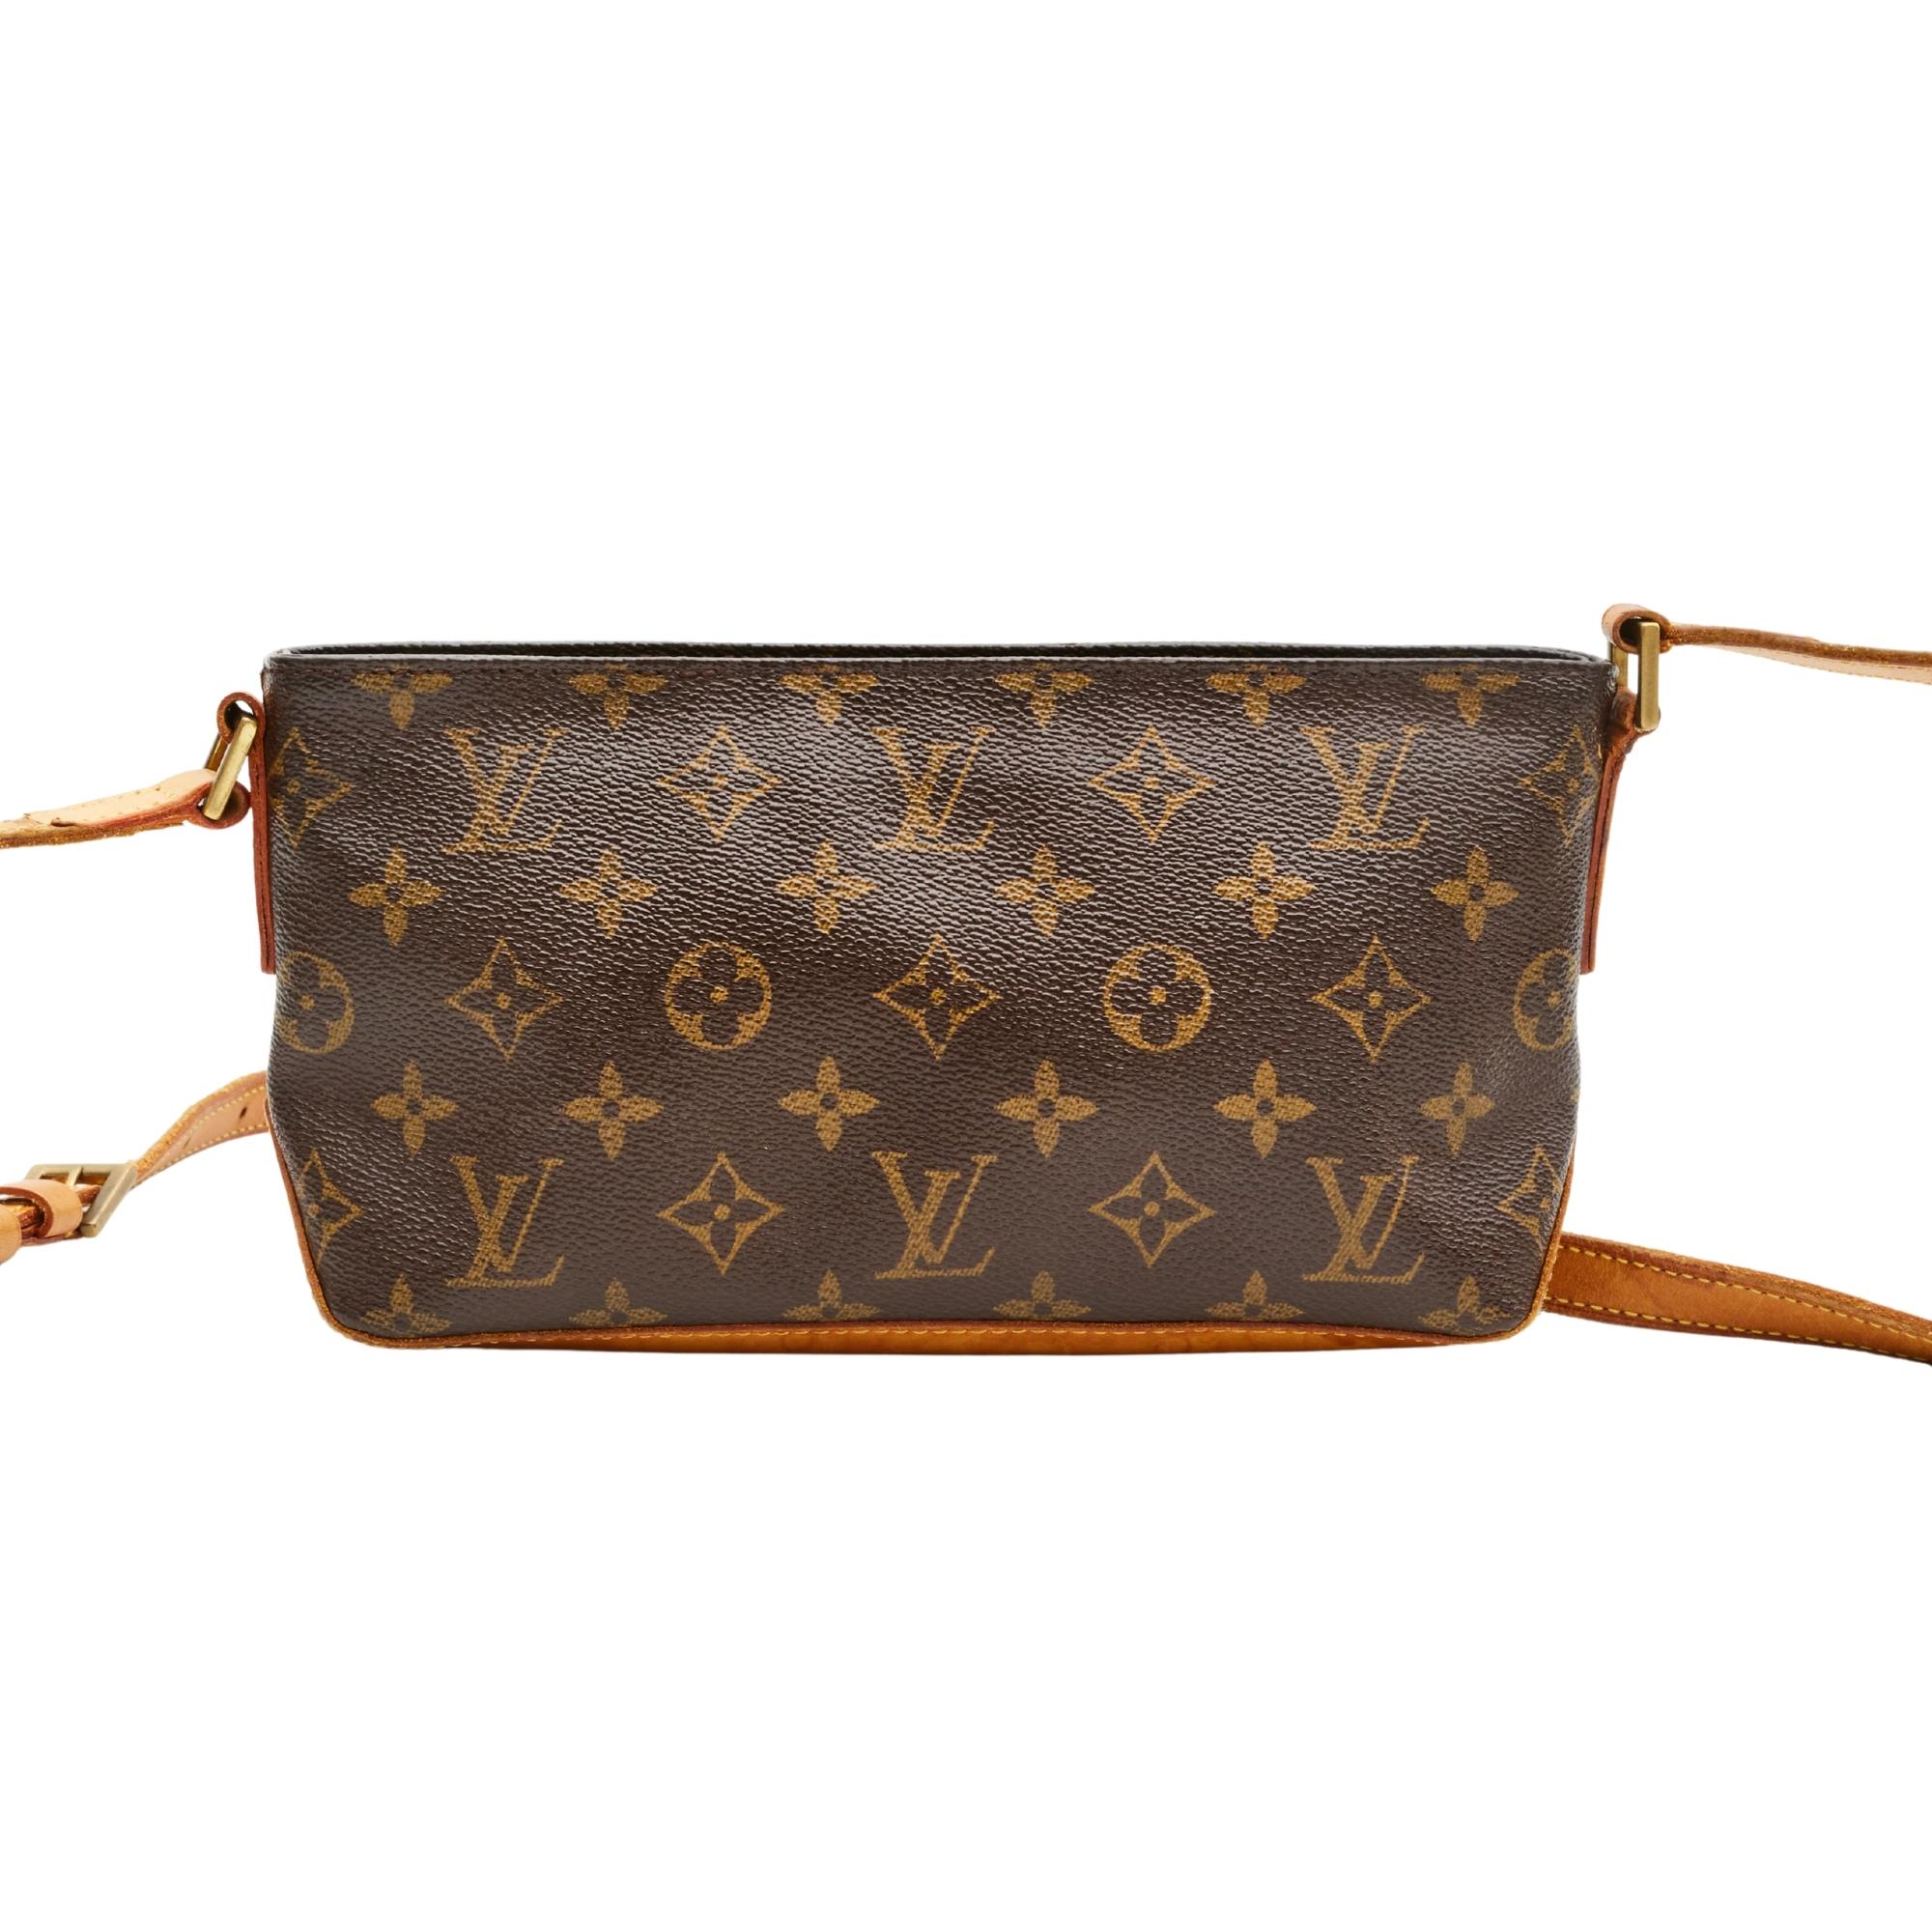 This shoulder bag is made with brown coated canvas with Louis Vuitton signature monogram print. The bag features beautifully aged light caramel natural cowhide leather finishes, top zip closure and a brown woven fabric interior.

COLOR: